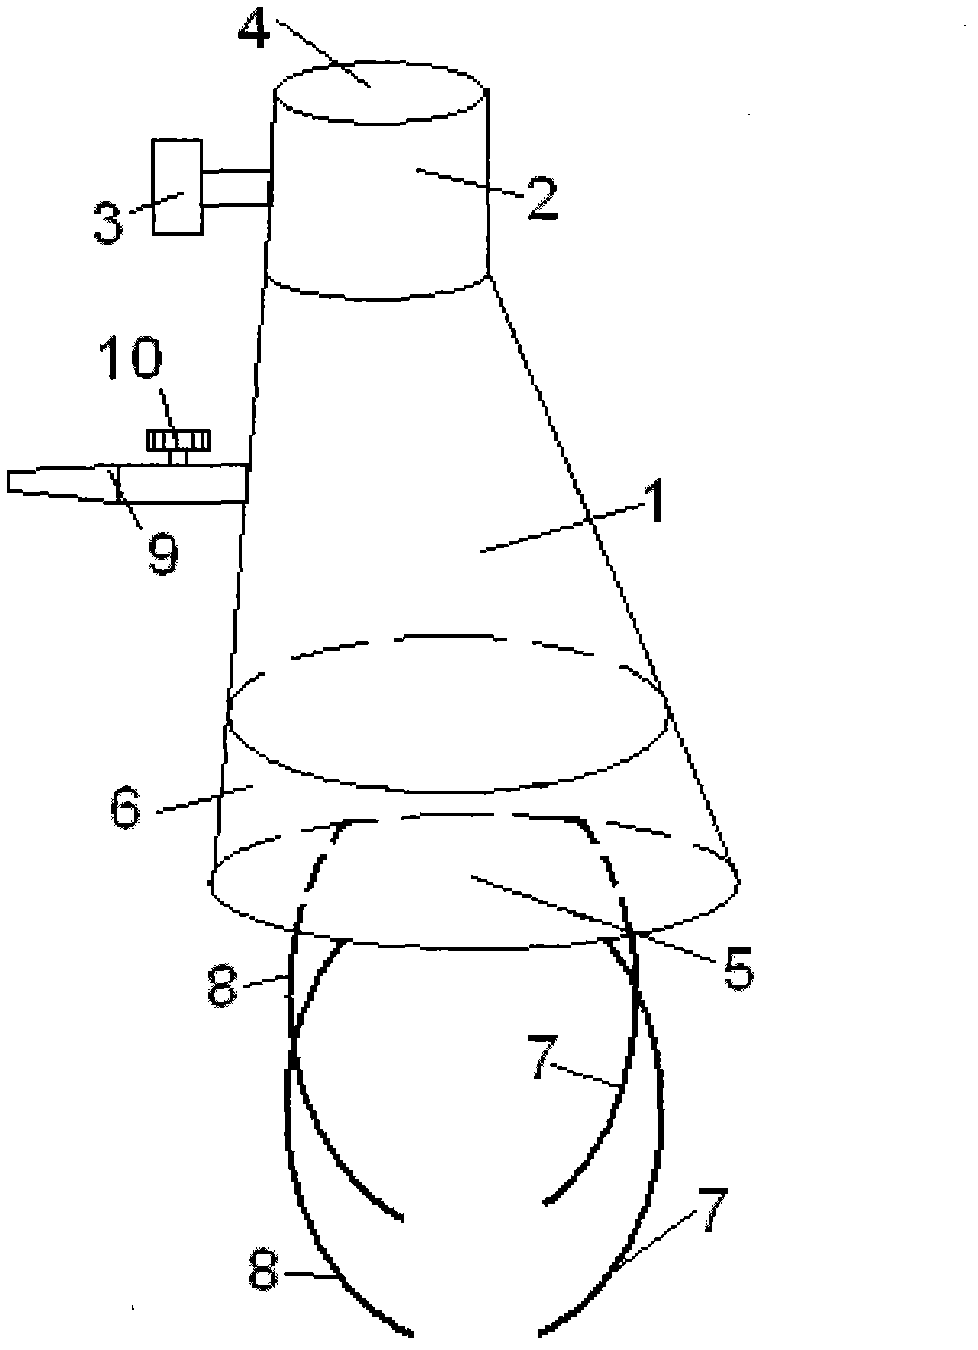 Oxygen inhalation device for relieving tachypnea of infant suffering from congenital heart disease